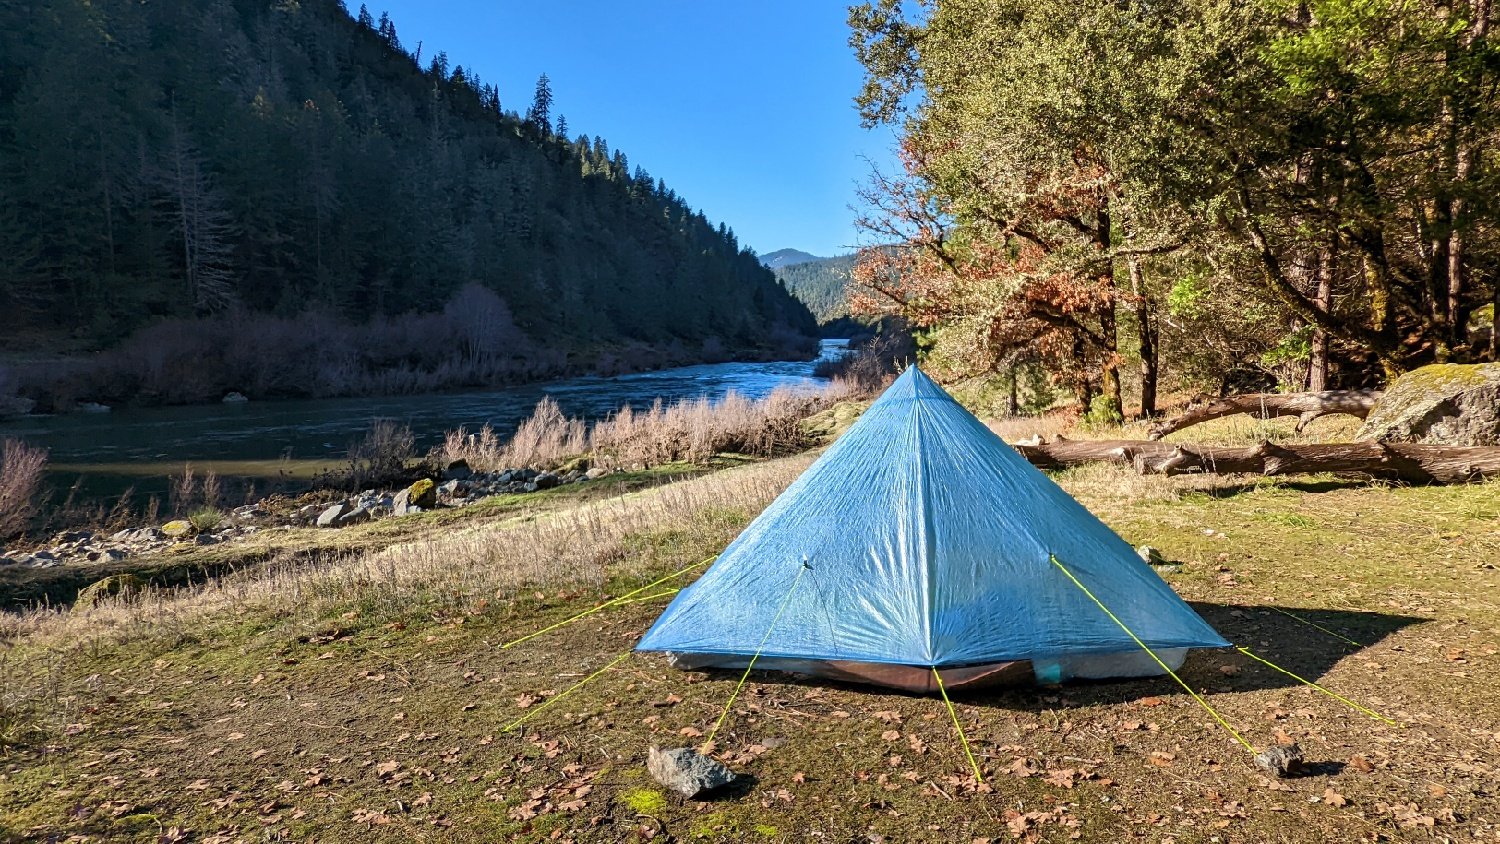 The Zpacks Plex Solo tent sitting in front of a river view